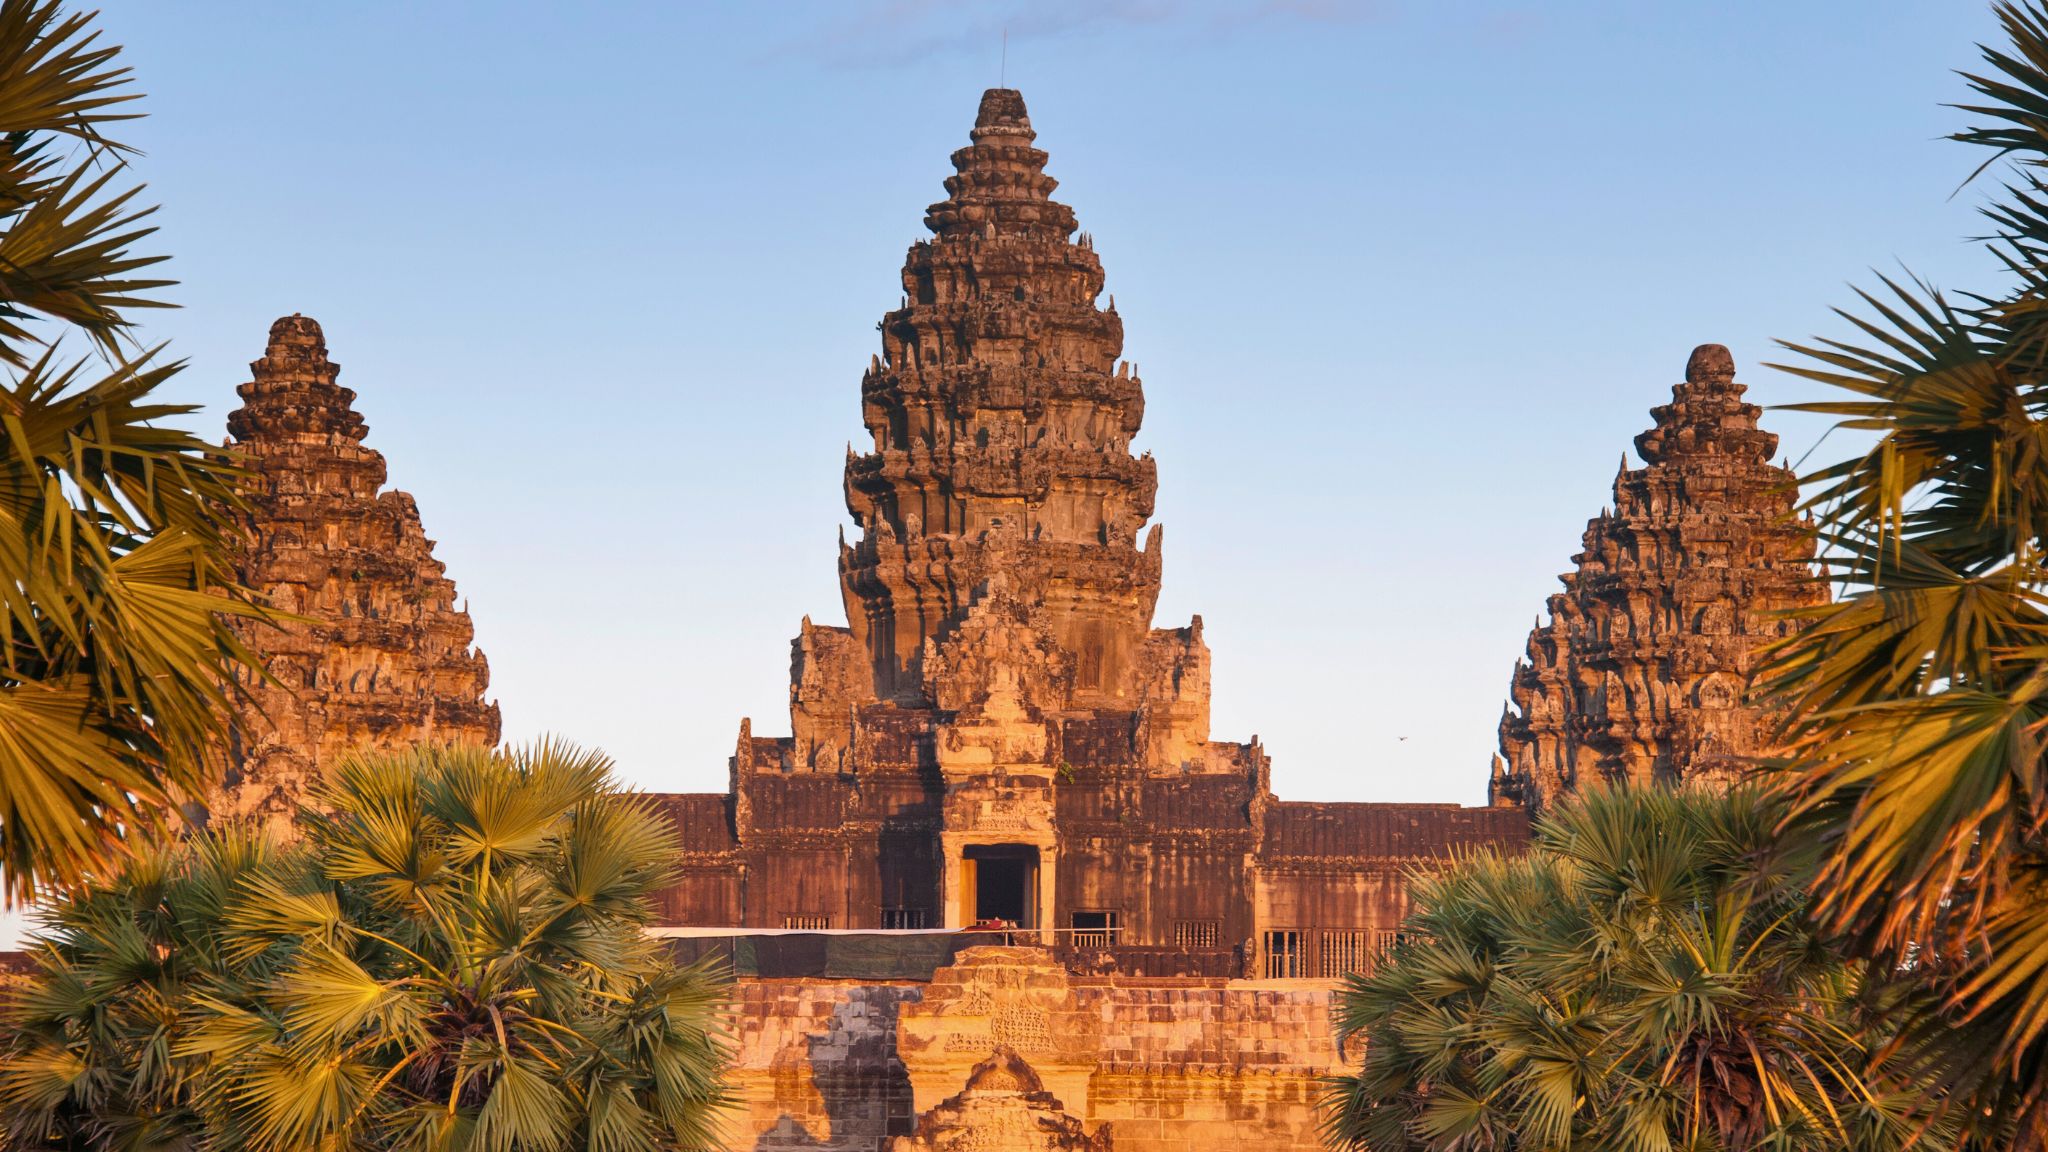 Day 2 Visit Magnificent Angkor Wat, The Largest Religious Monument In The World